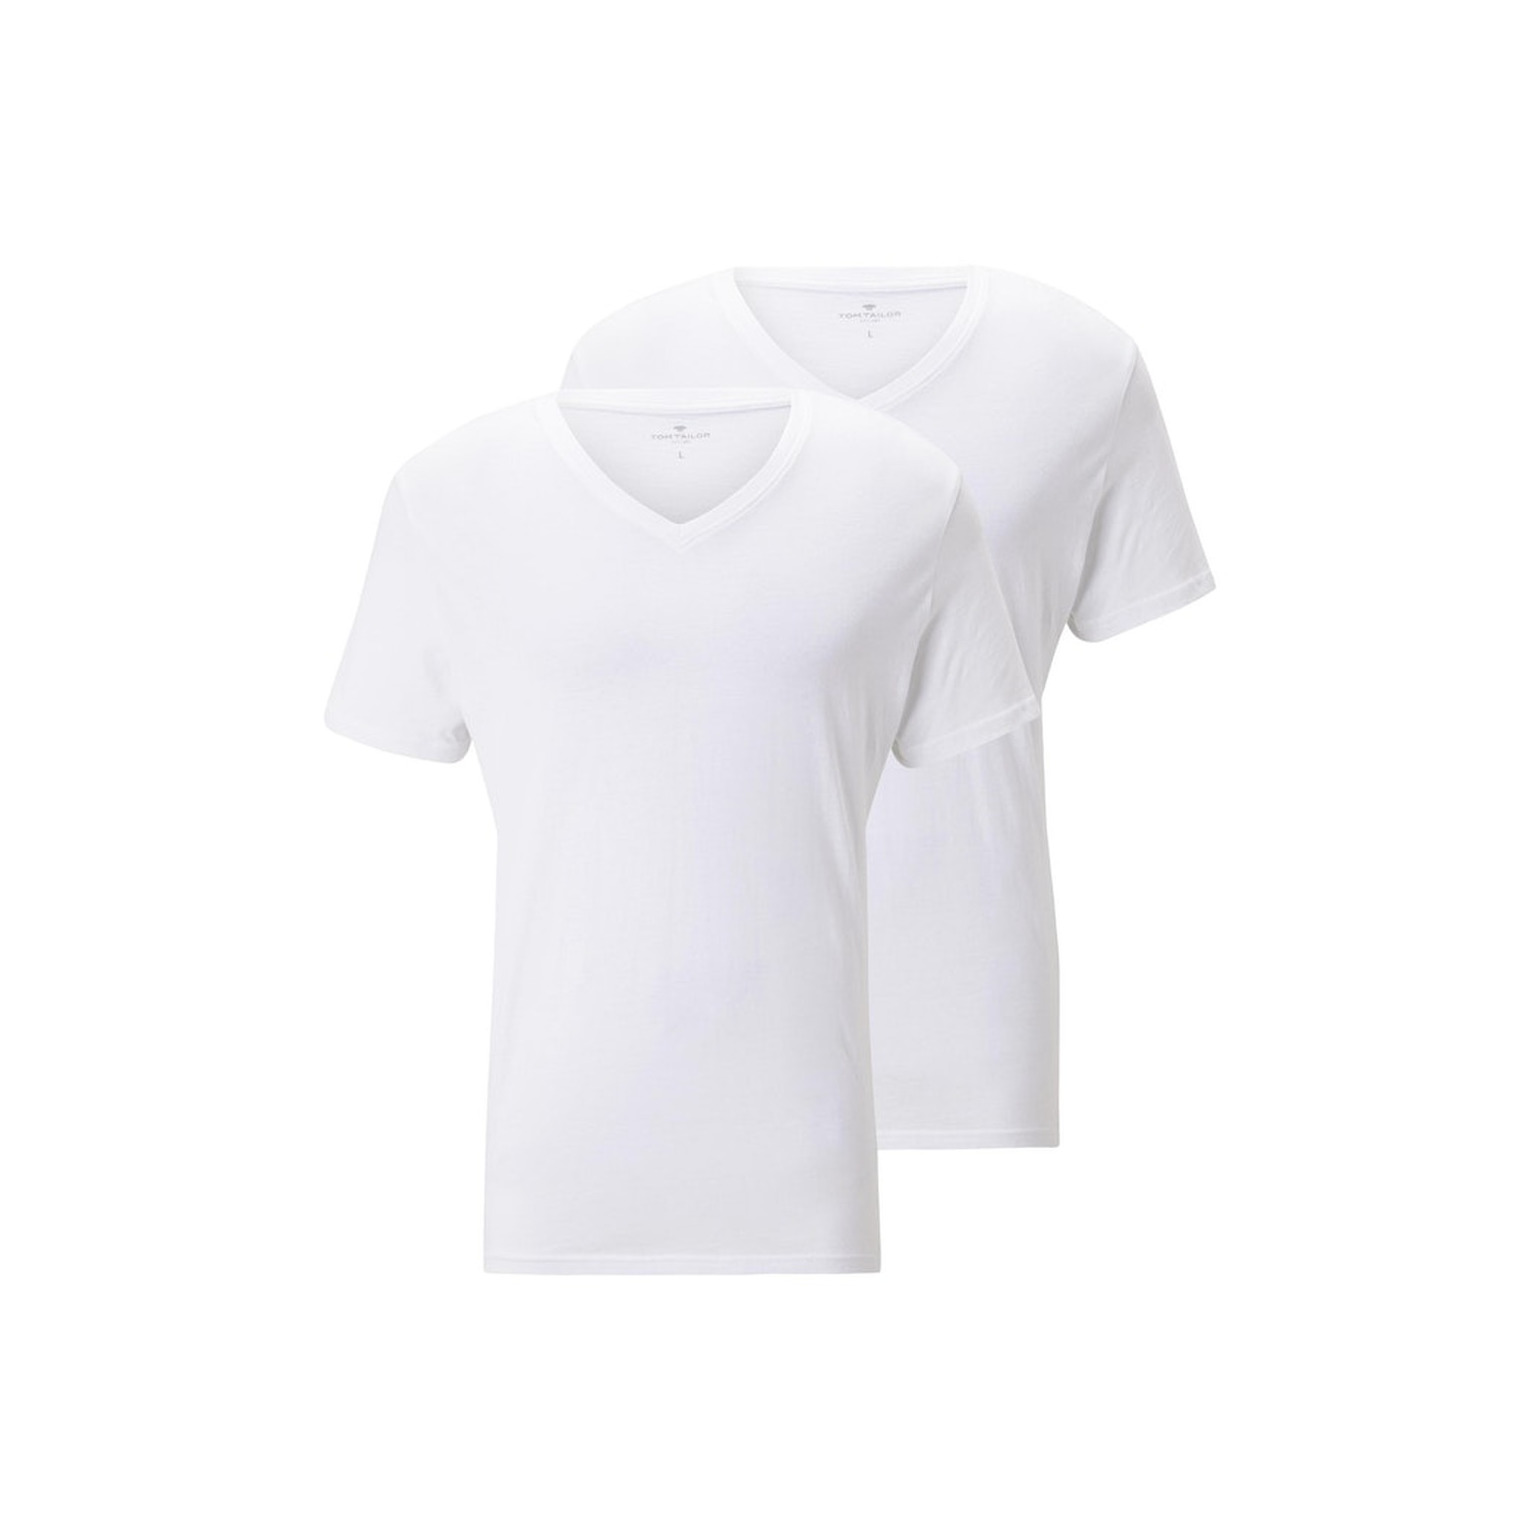 TOM TAILOR double pack v- Mücke Shirts neck tee | Schuh